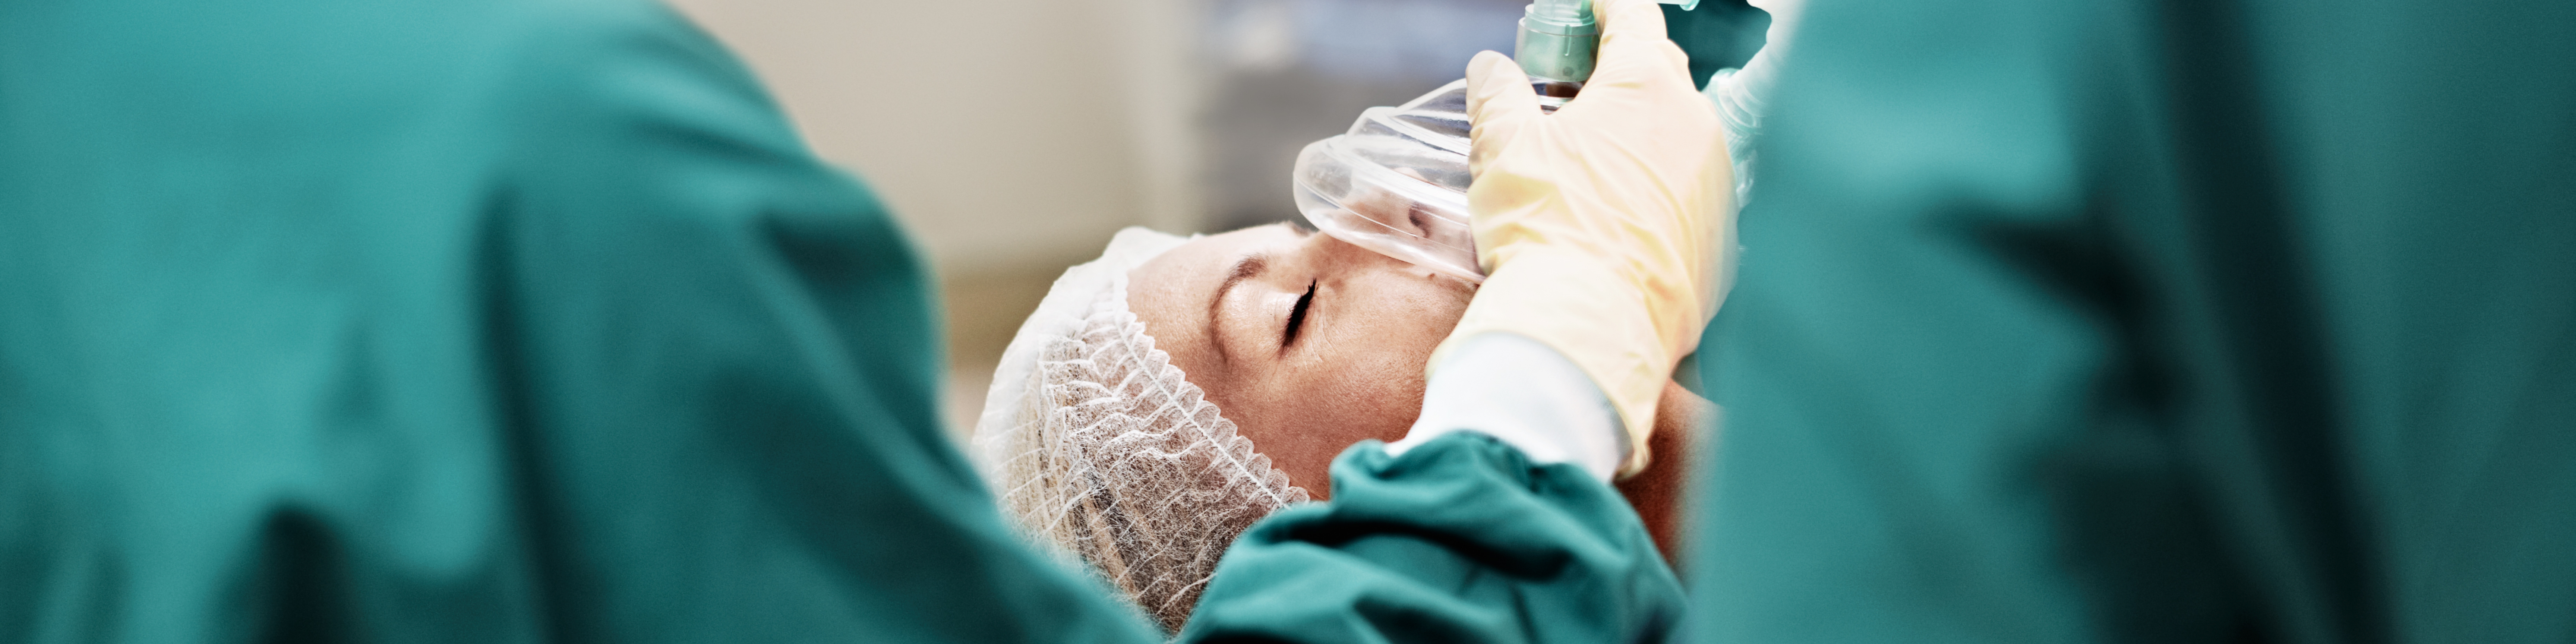 5 aspects to implementing Safe Sedation standards